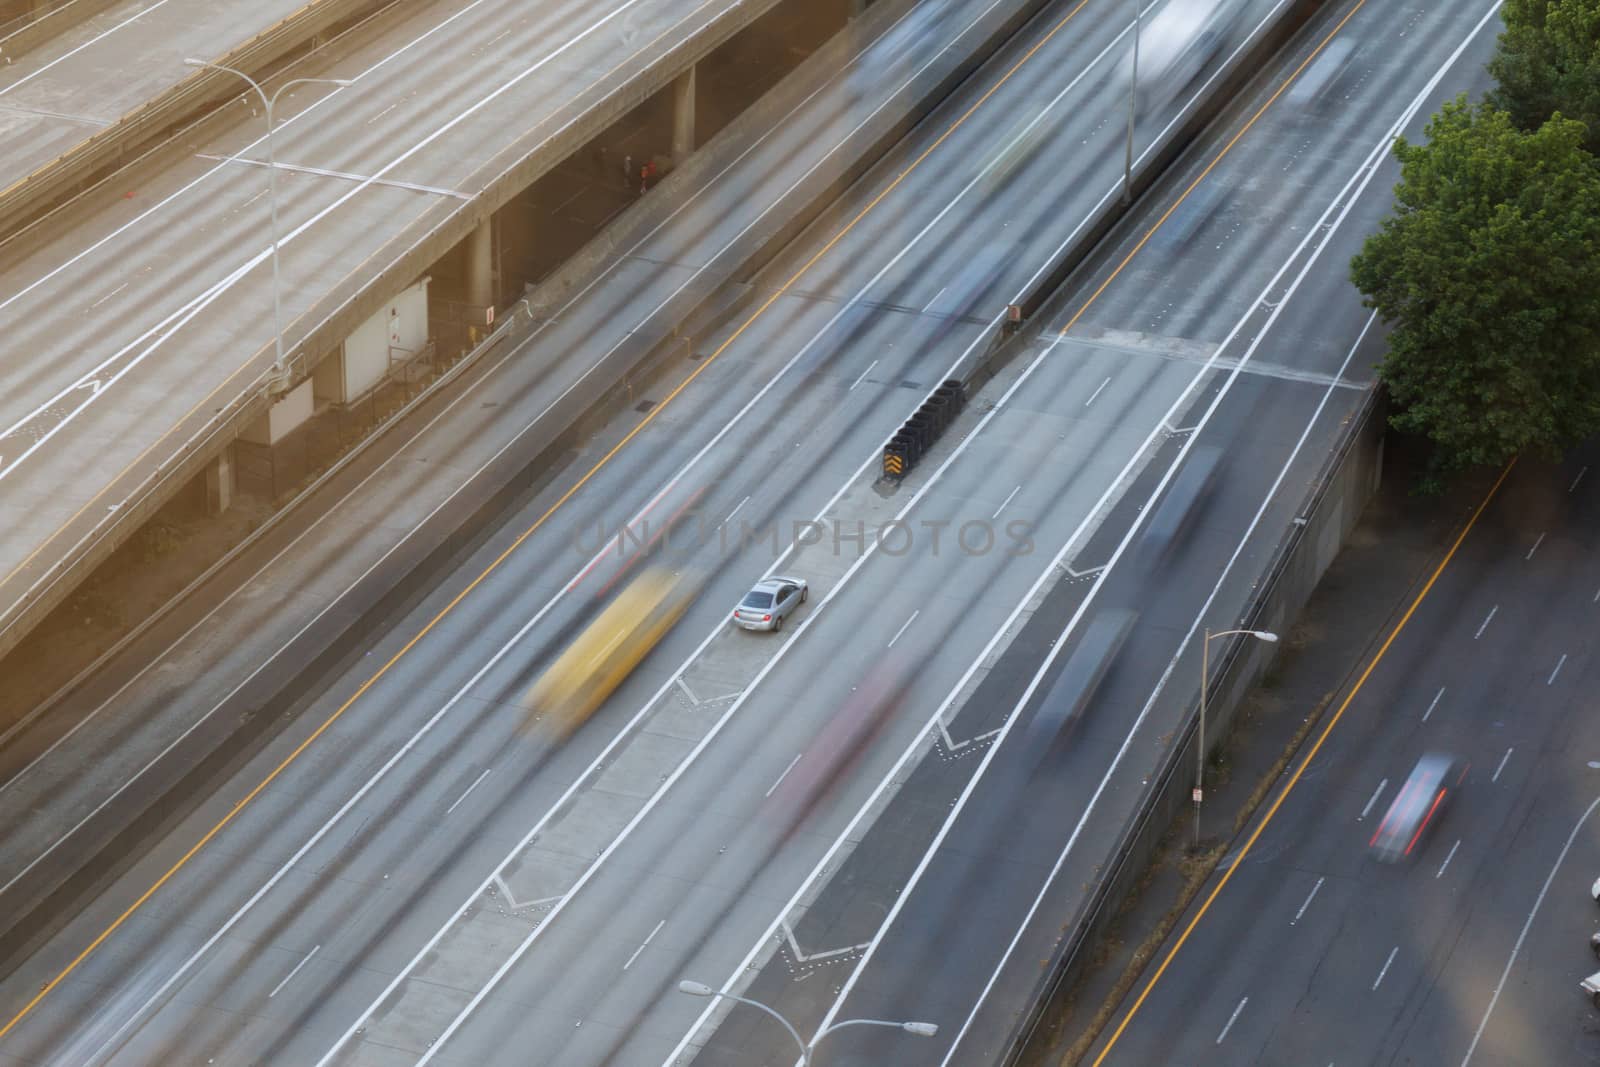 Motion Blur on Freeway by jhlemmer